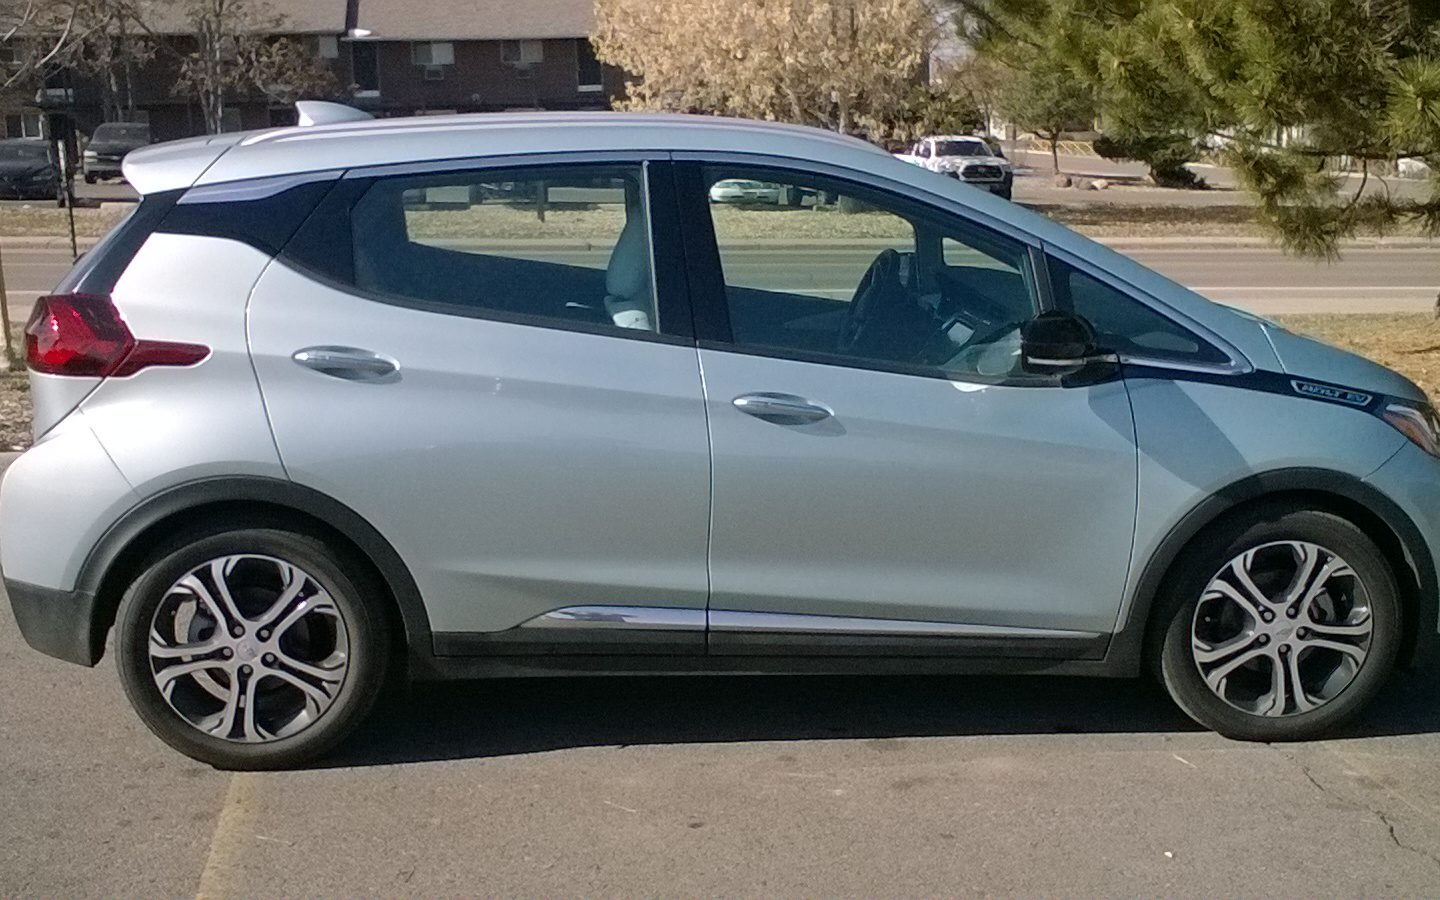 Why We Chose the Chevy Bolt (Plus Test Drive Notes)